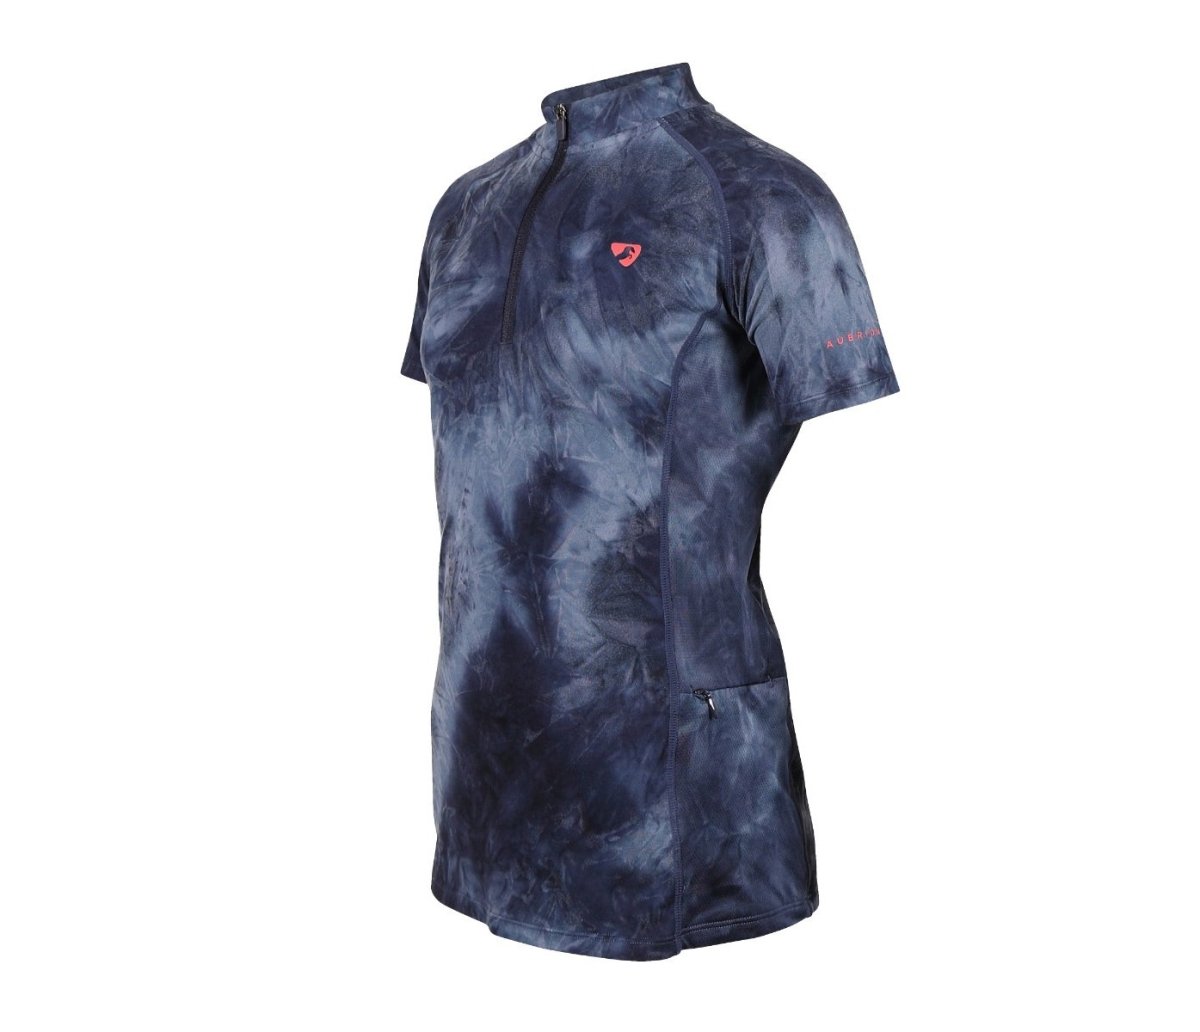 Aubrion SS24 Revive Short Sleeve Base Layer - Young Rider - Navy TyeDye - 11/12 Years